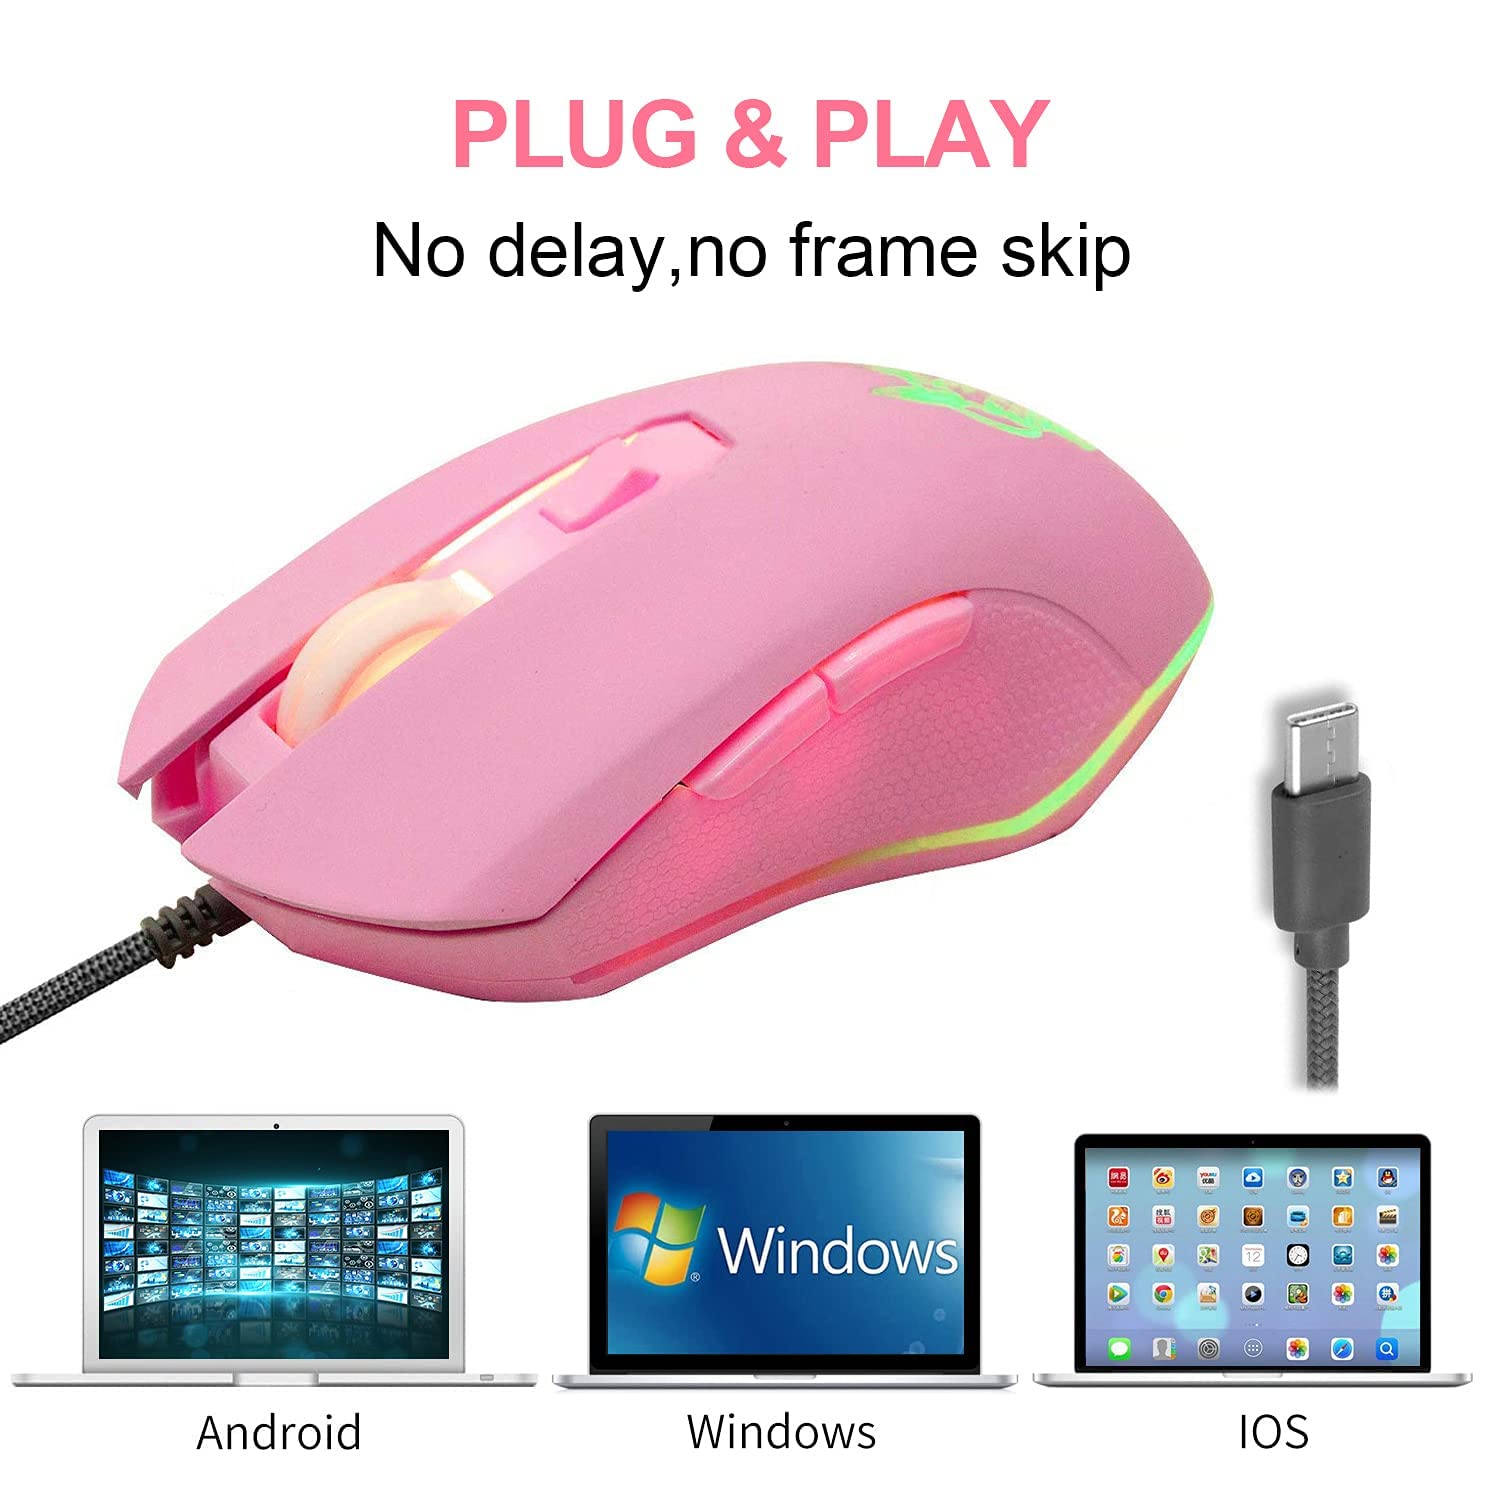 Huifen Wired USB C Gaming Mouse, Silent RGB Gaming Mice 7 Colors Backlit, 2400 DPI, Type C RGB Wired Mouse Gaming for Office Home PC and Notebook and All Type-C Device (Pink) …